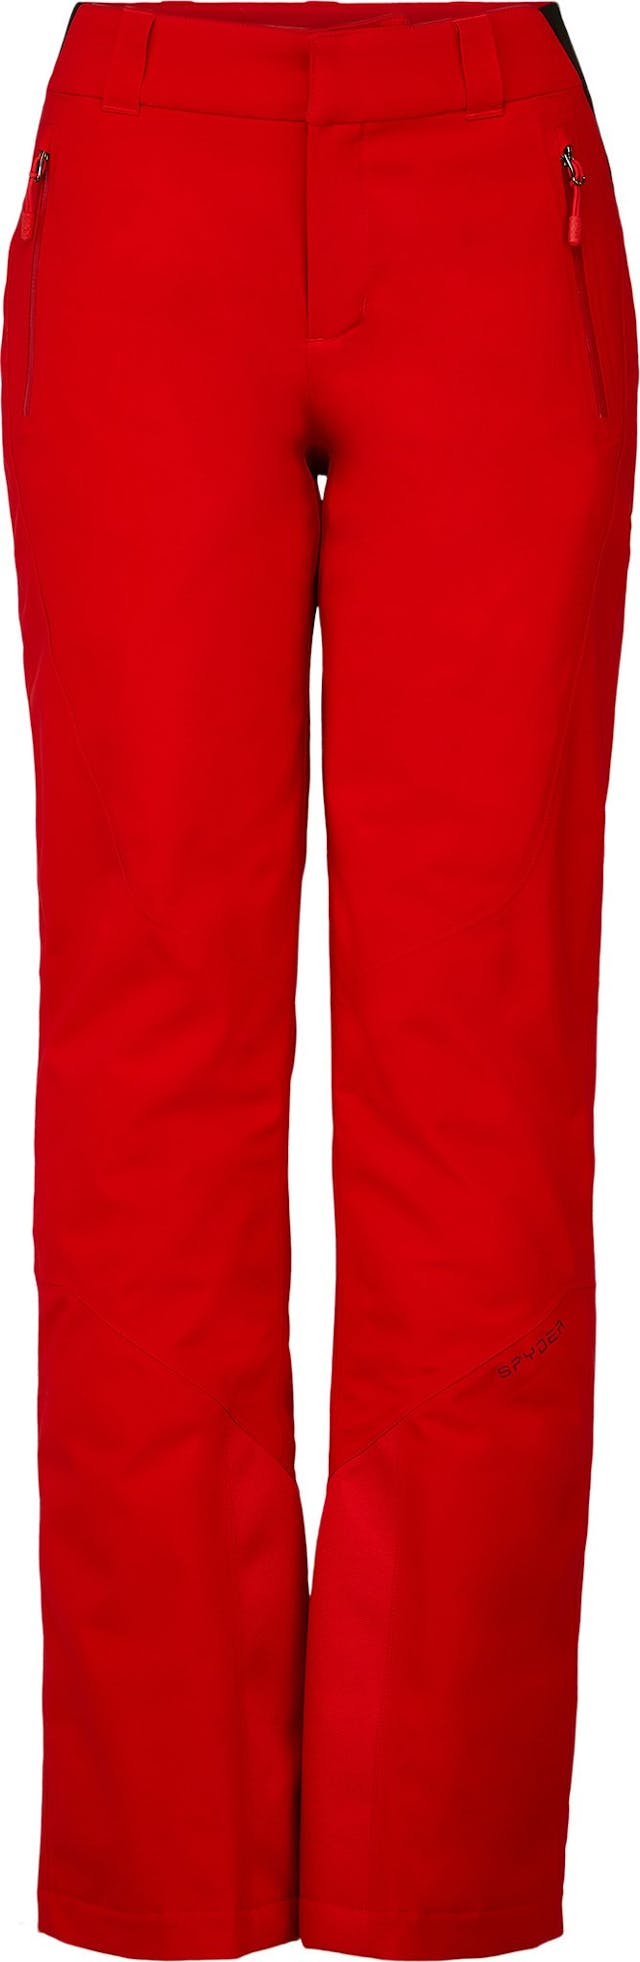 Product image for Winner Gore-TEX Pant - Women's